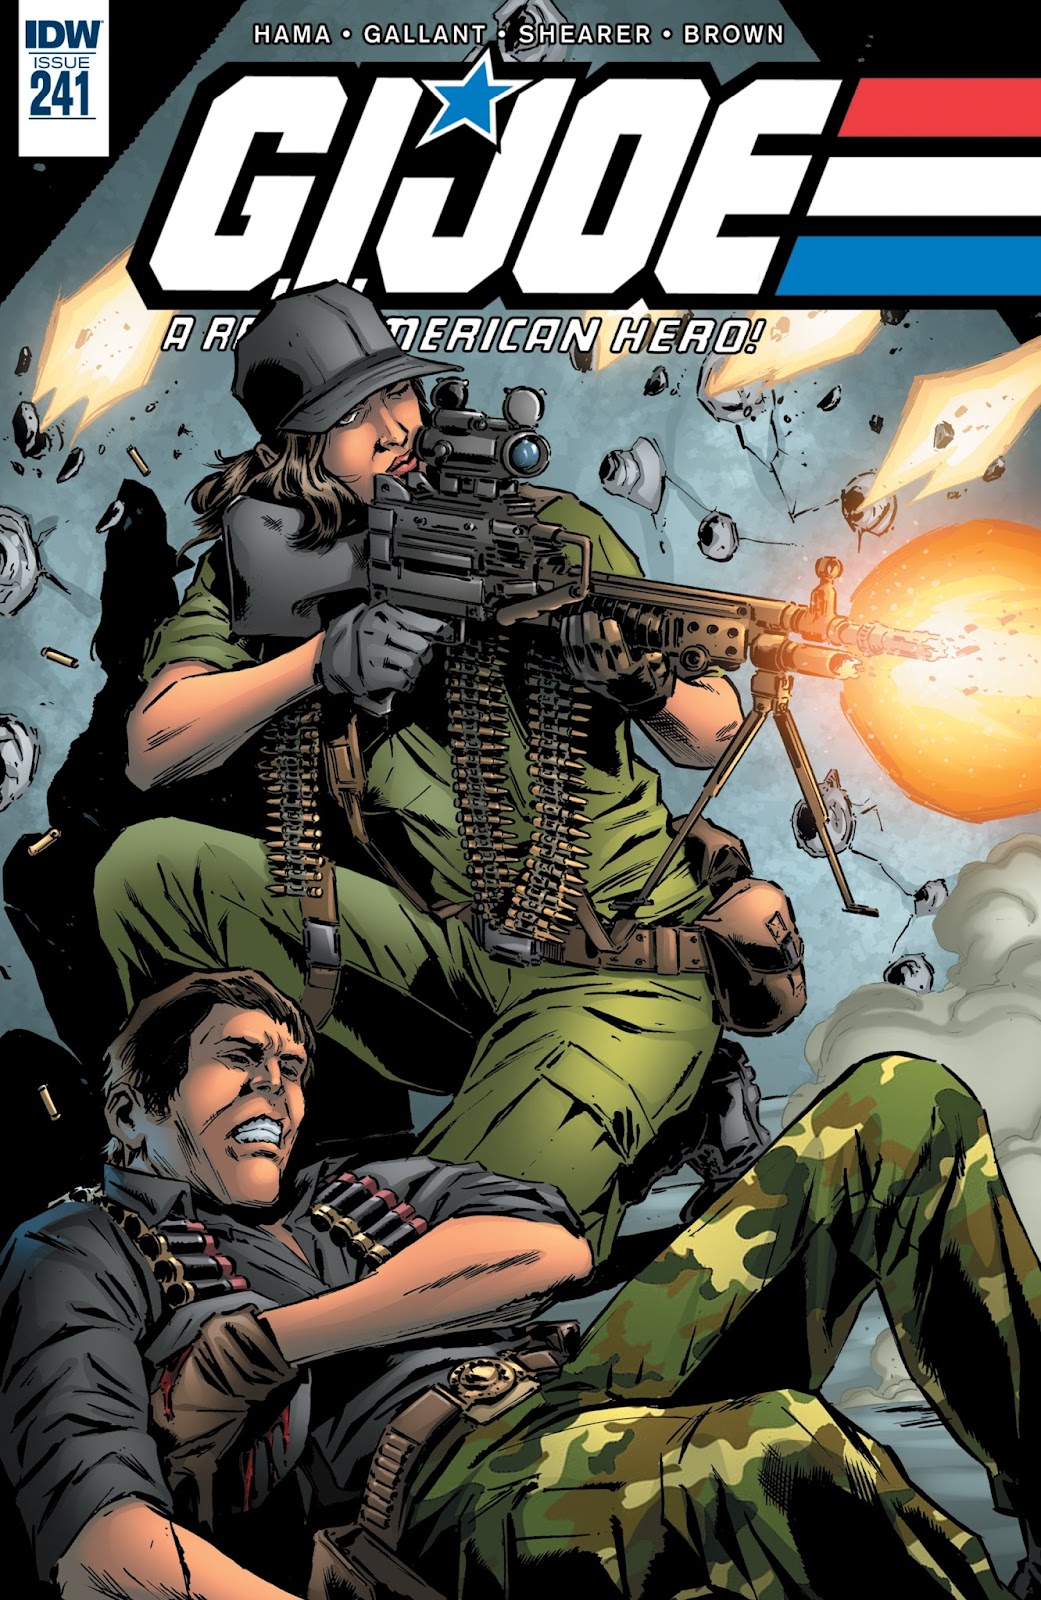 G.I. Joe: A Real American Hero issue 241 - Page 1